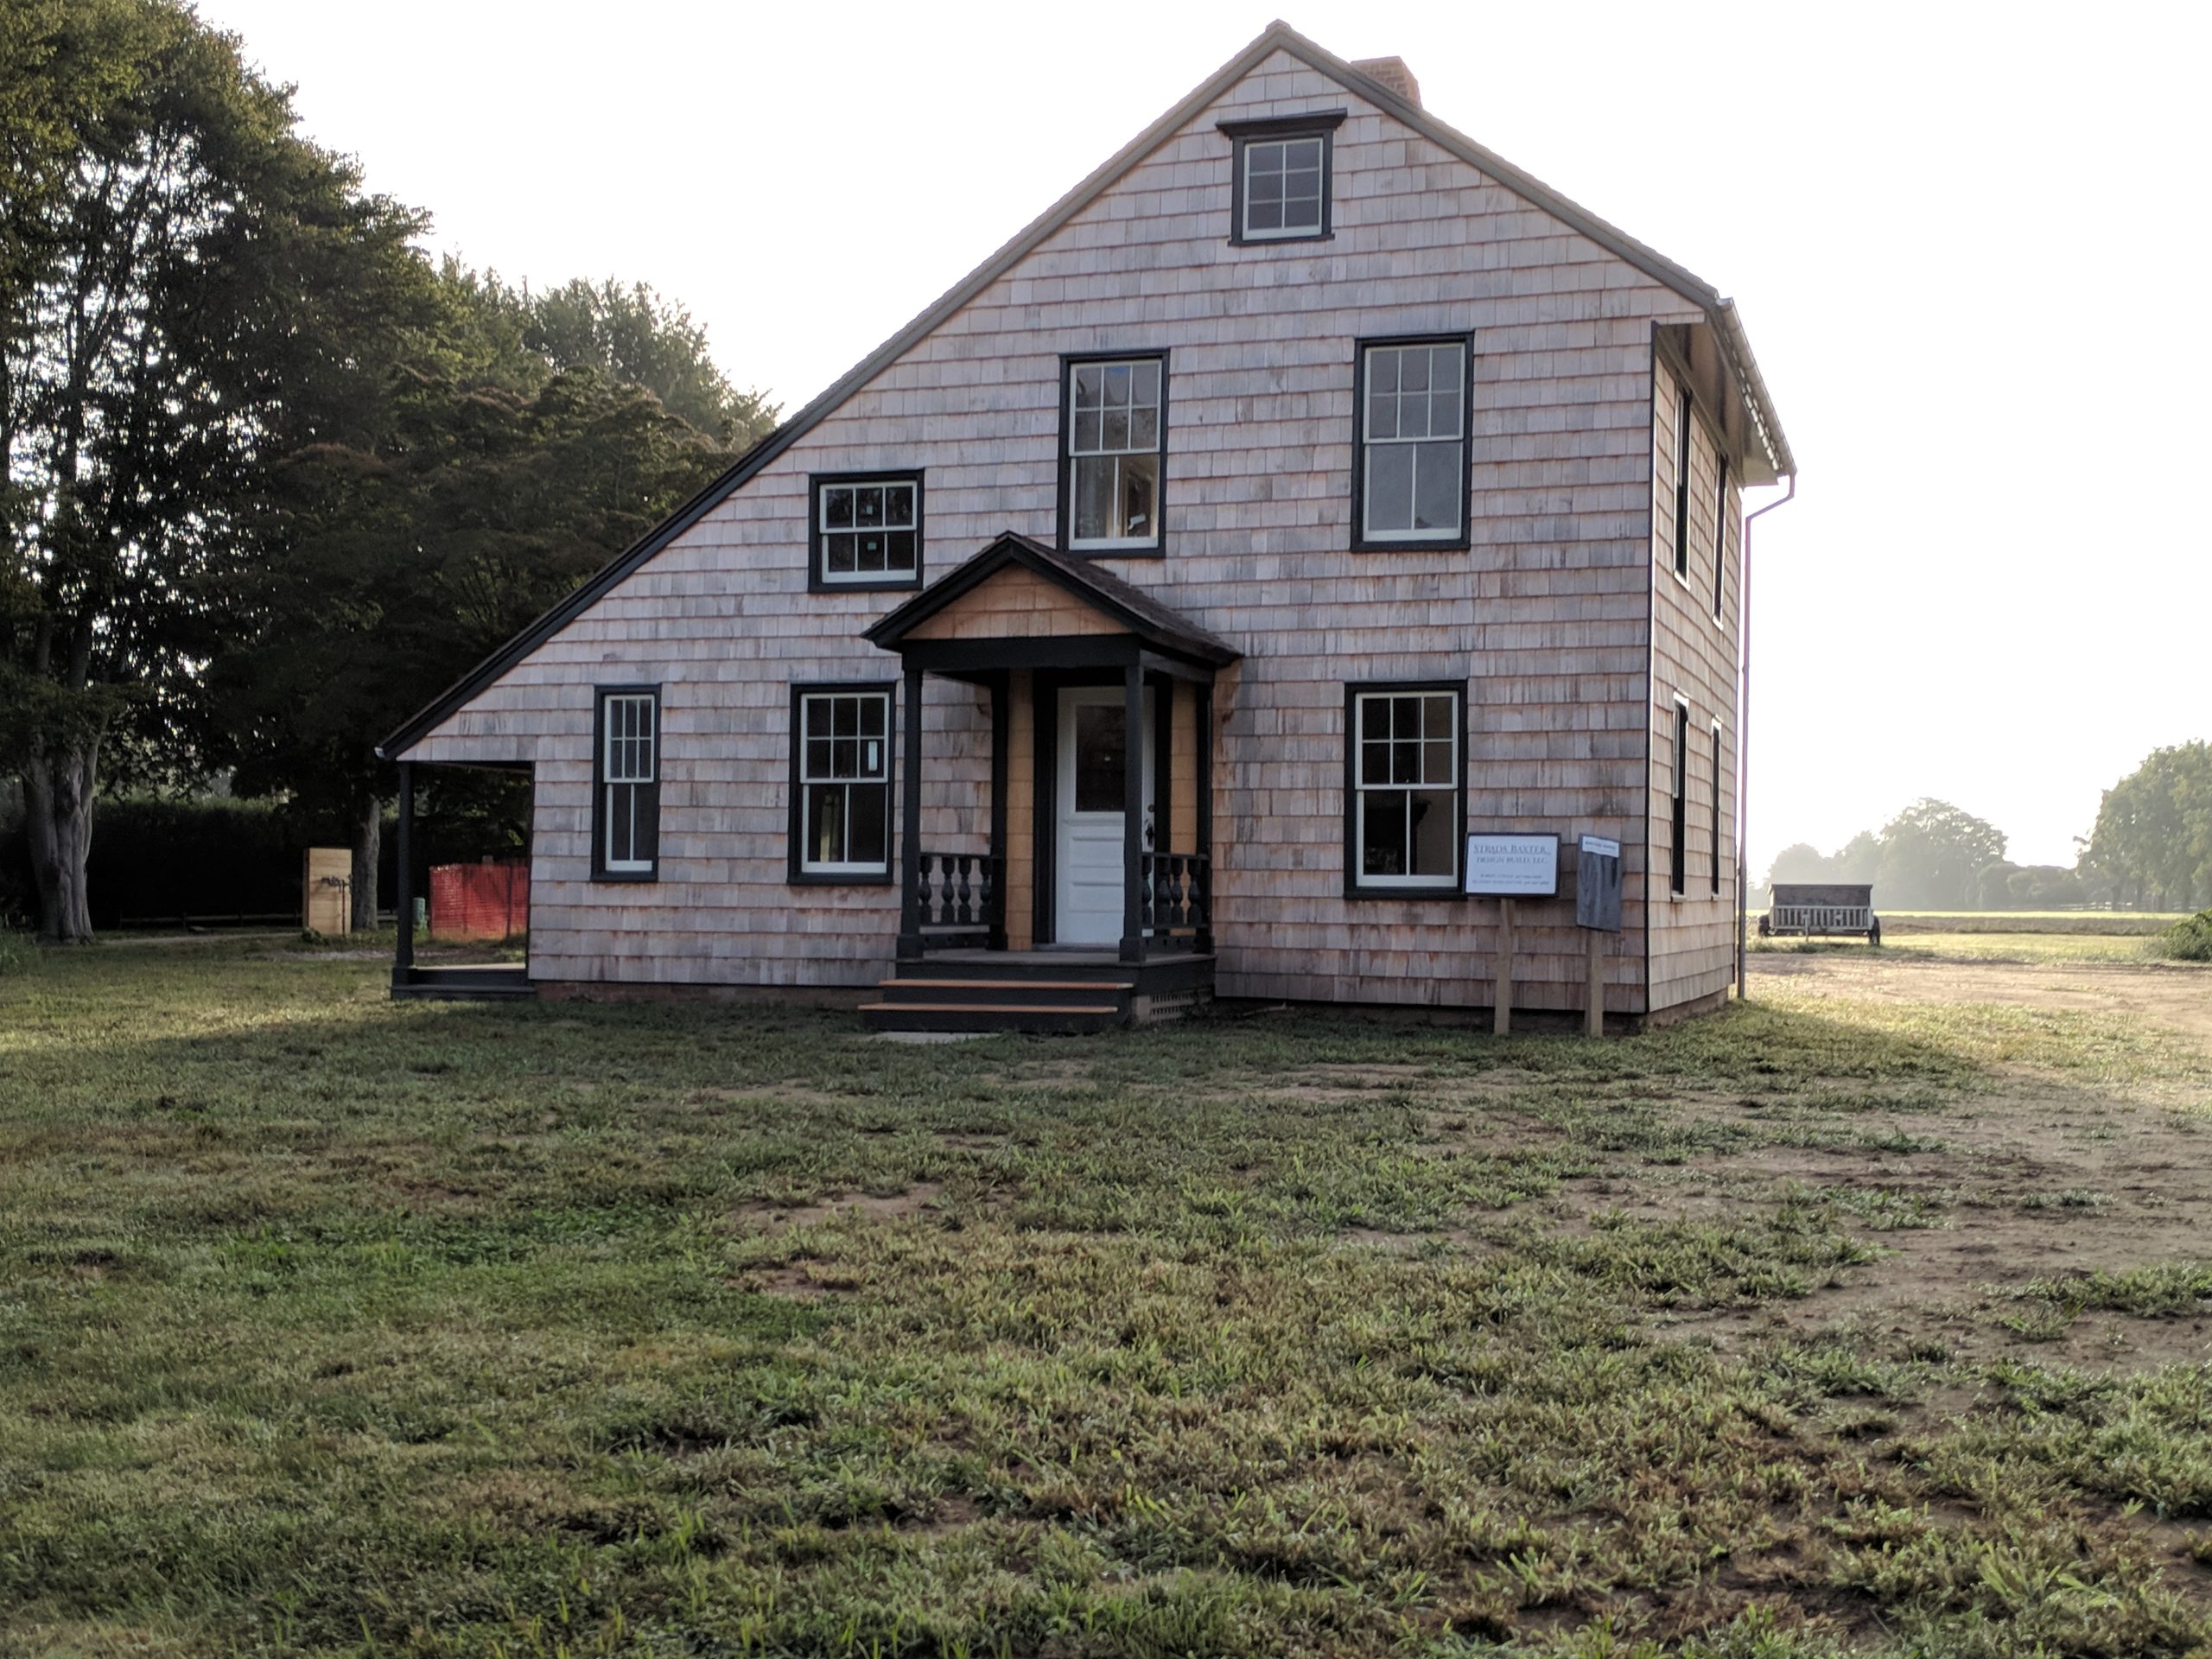 History and Fun Facts About Saltbox House